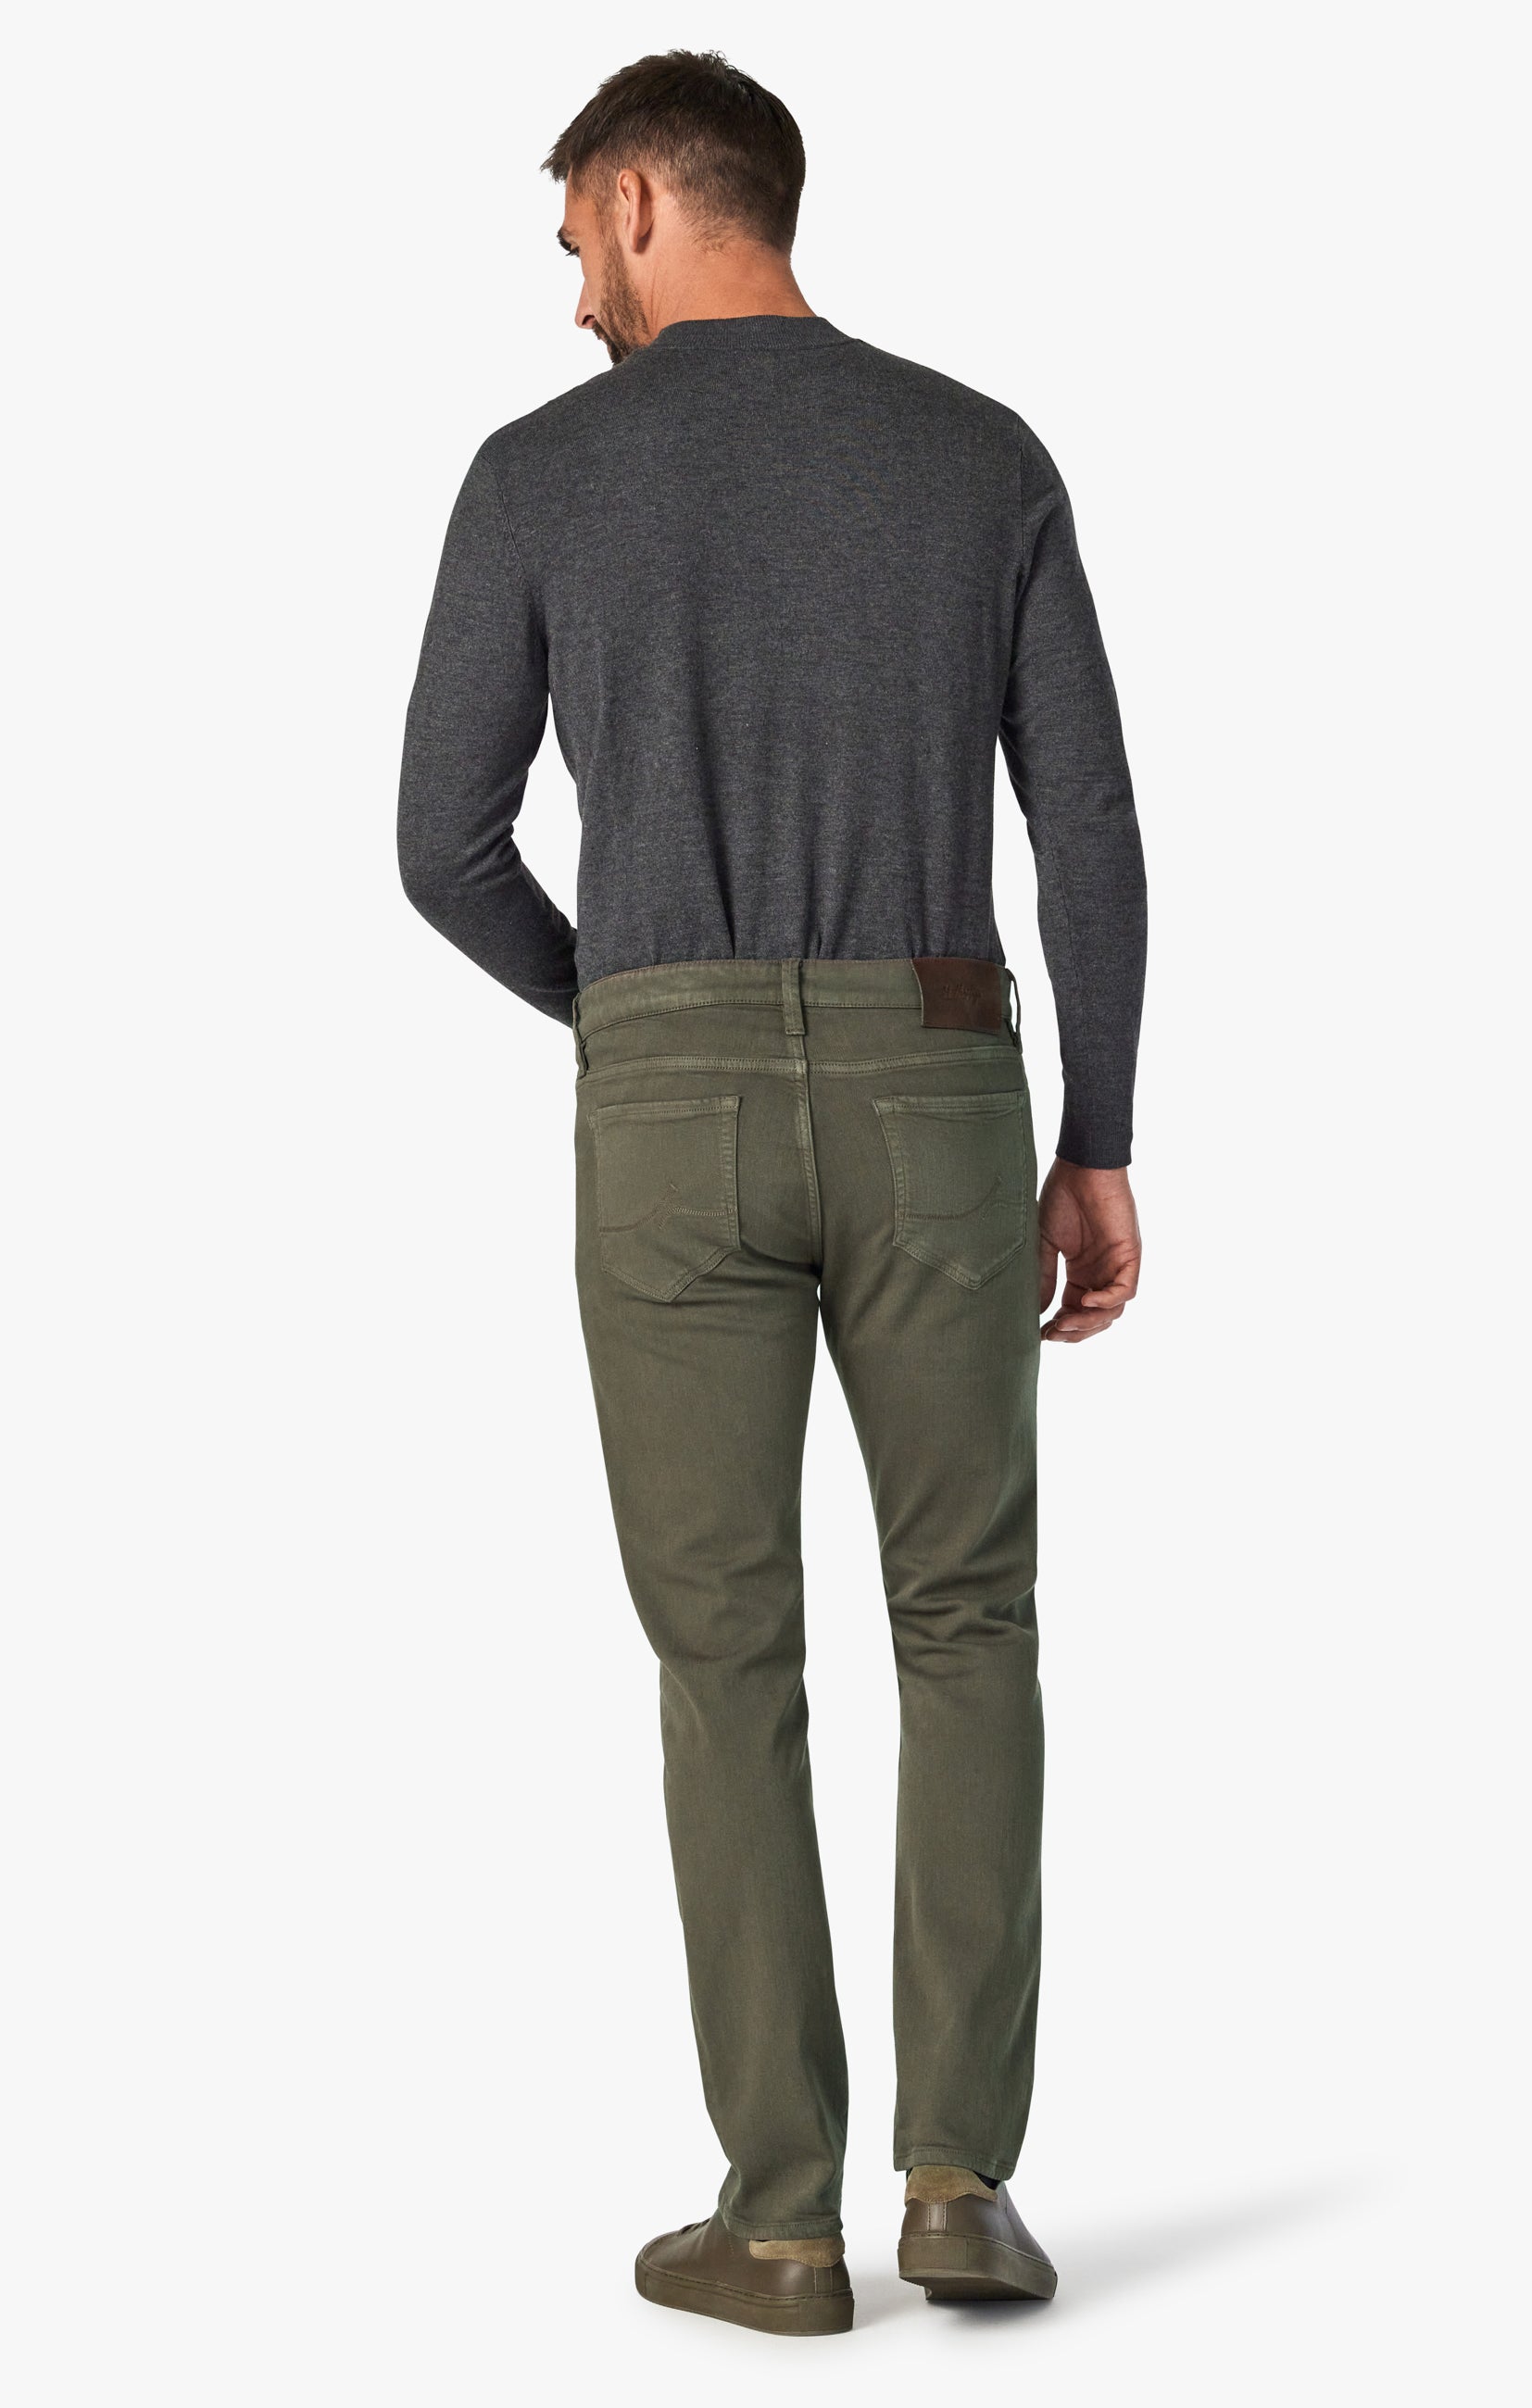 Charisma Classic Fit Pants in Green Comfort Image 3